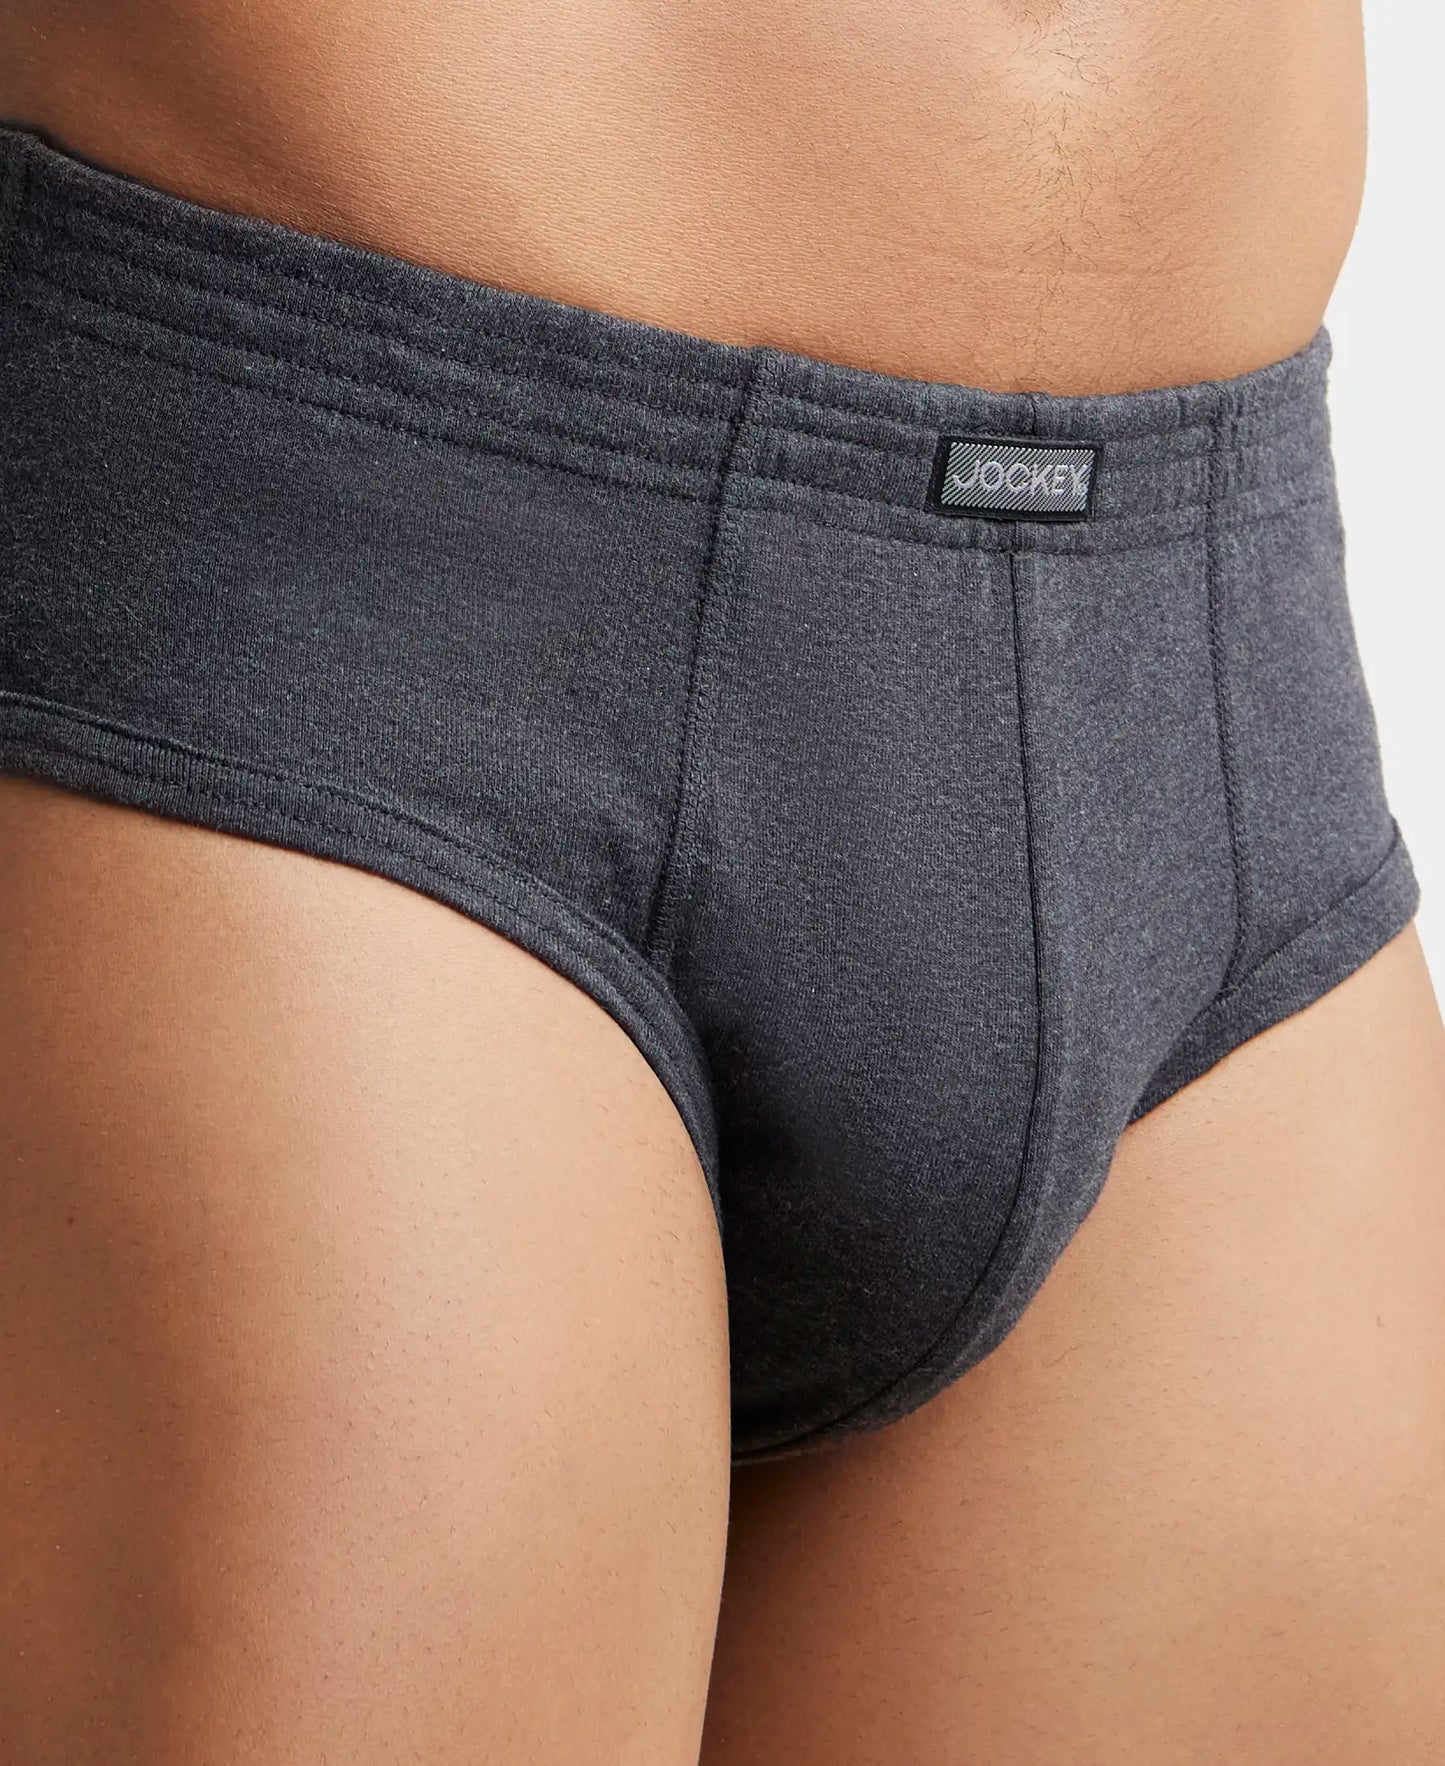 Super Combed Cotton Rib Solid Brief with StayFresh Treatment - Black Melange (Pack of 2)